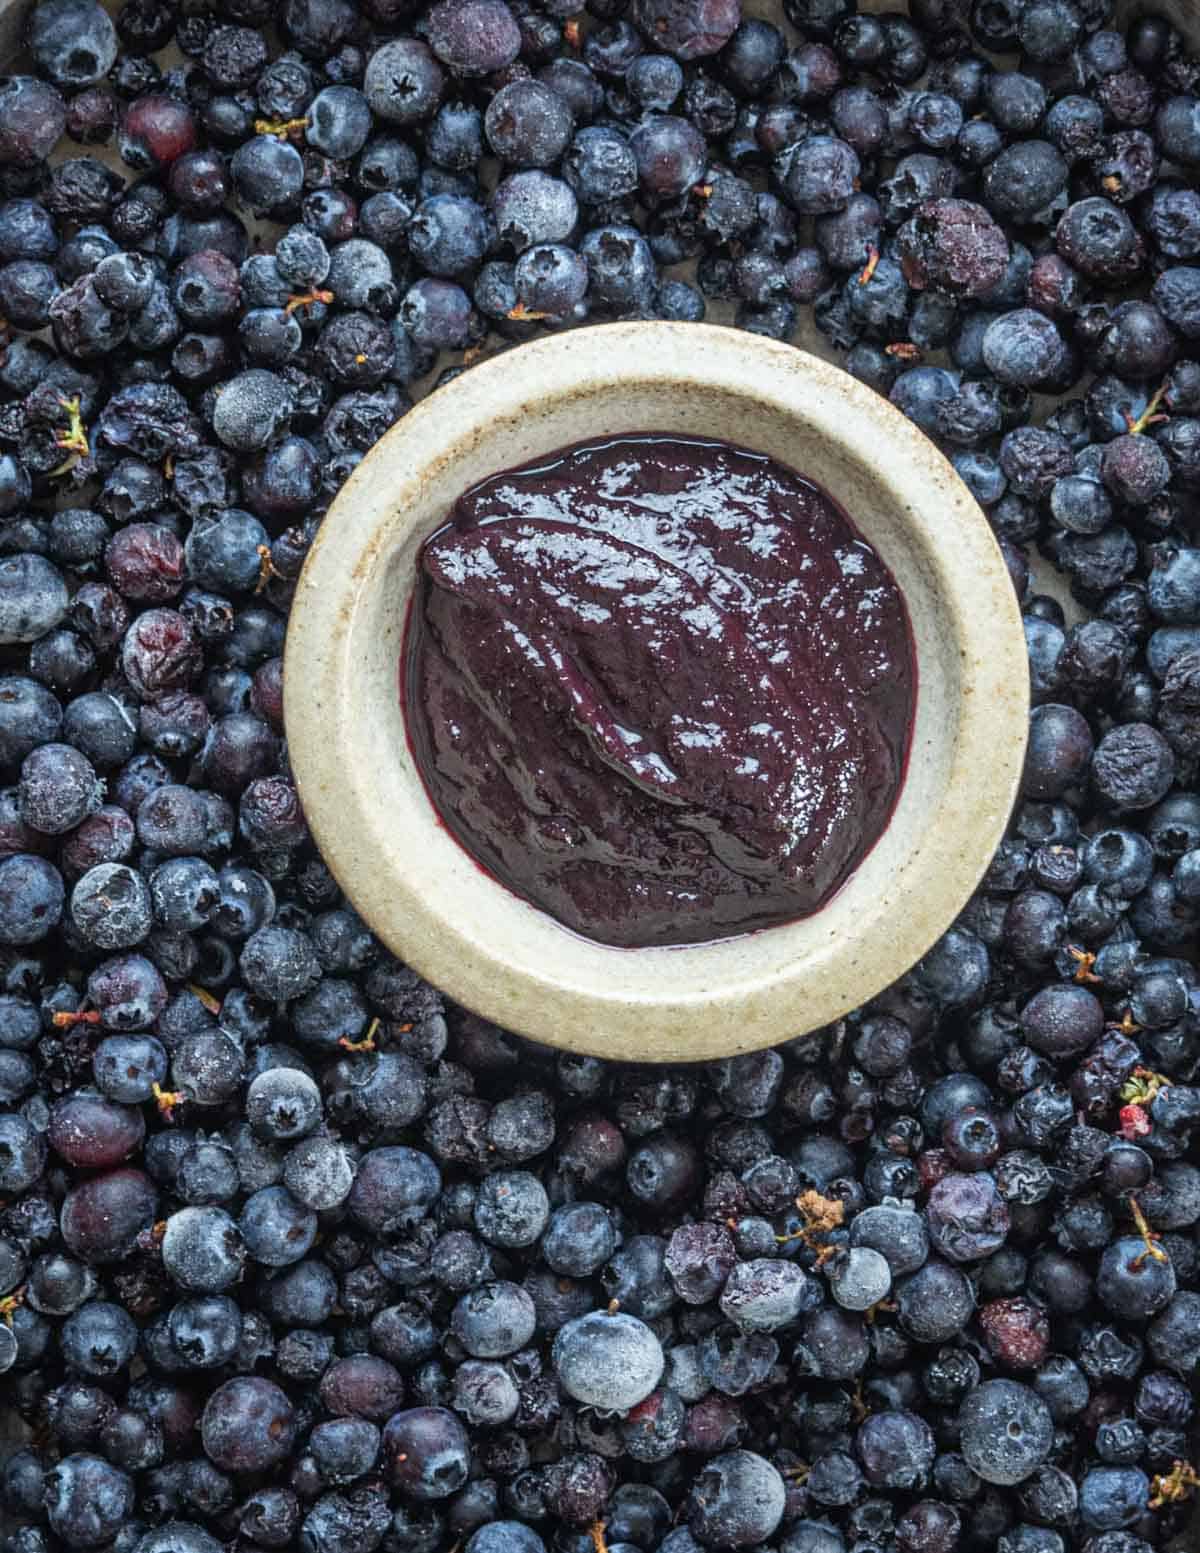 Blueberry barbecue sauce made from fresh wild blueberries in a cup surrounded by wild blueberries. 